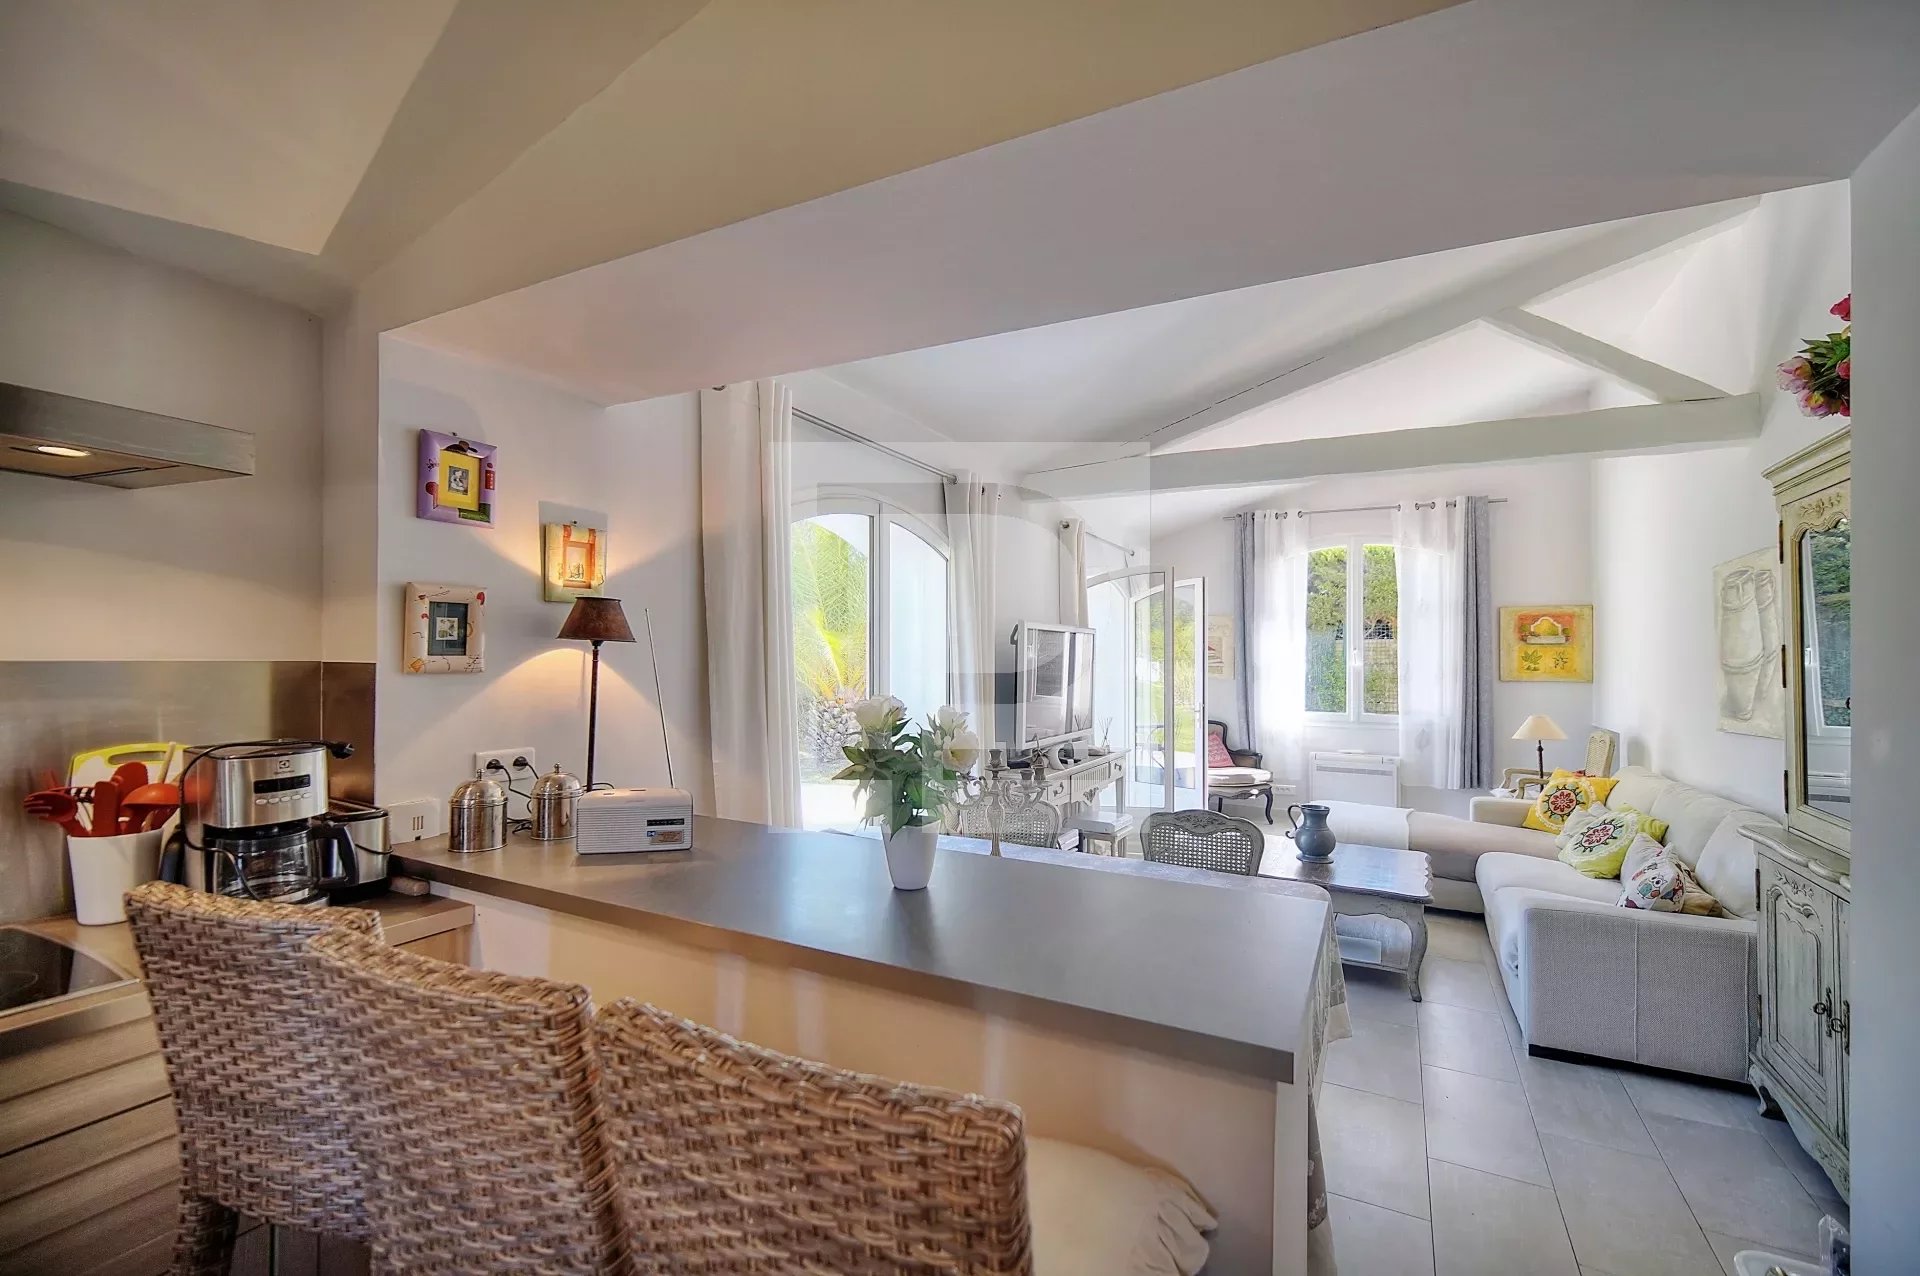 Back on the market - Magnificent property in the heart of one of the most sought-after areas of Mougins